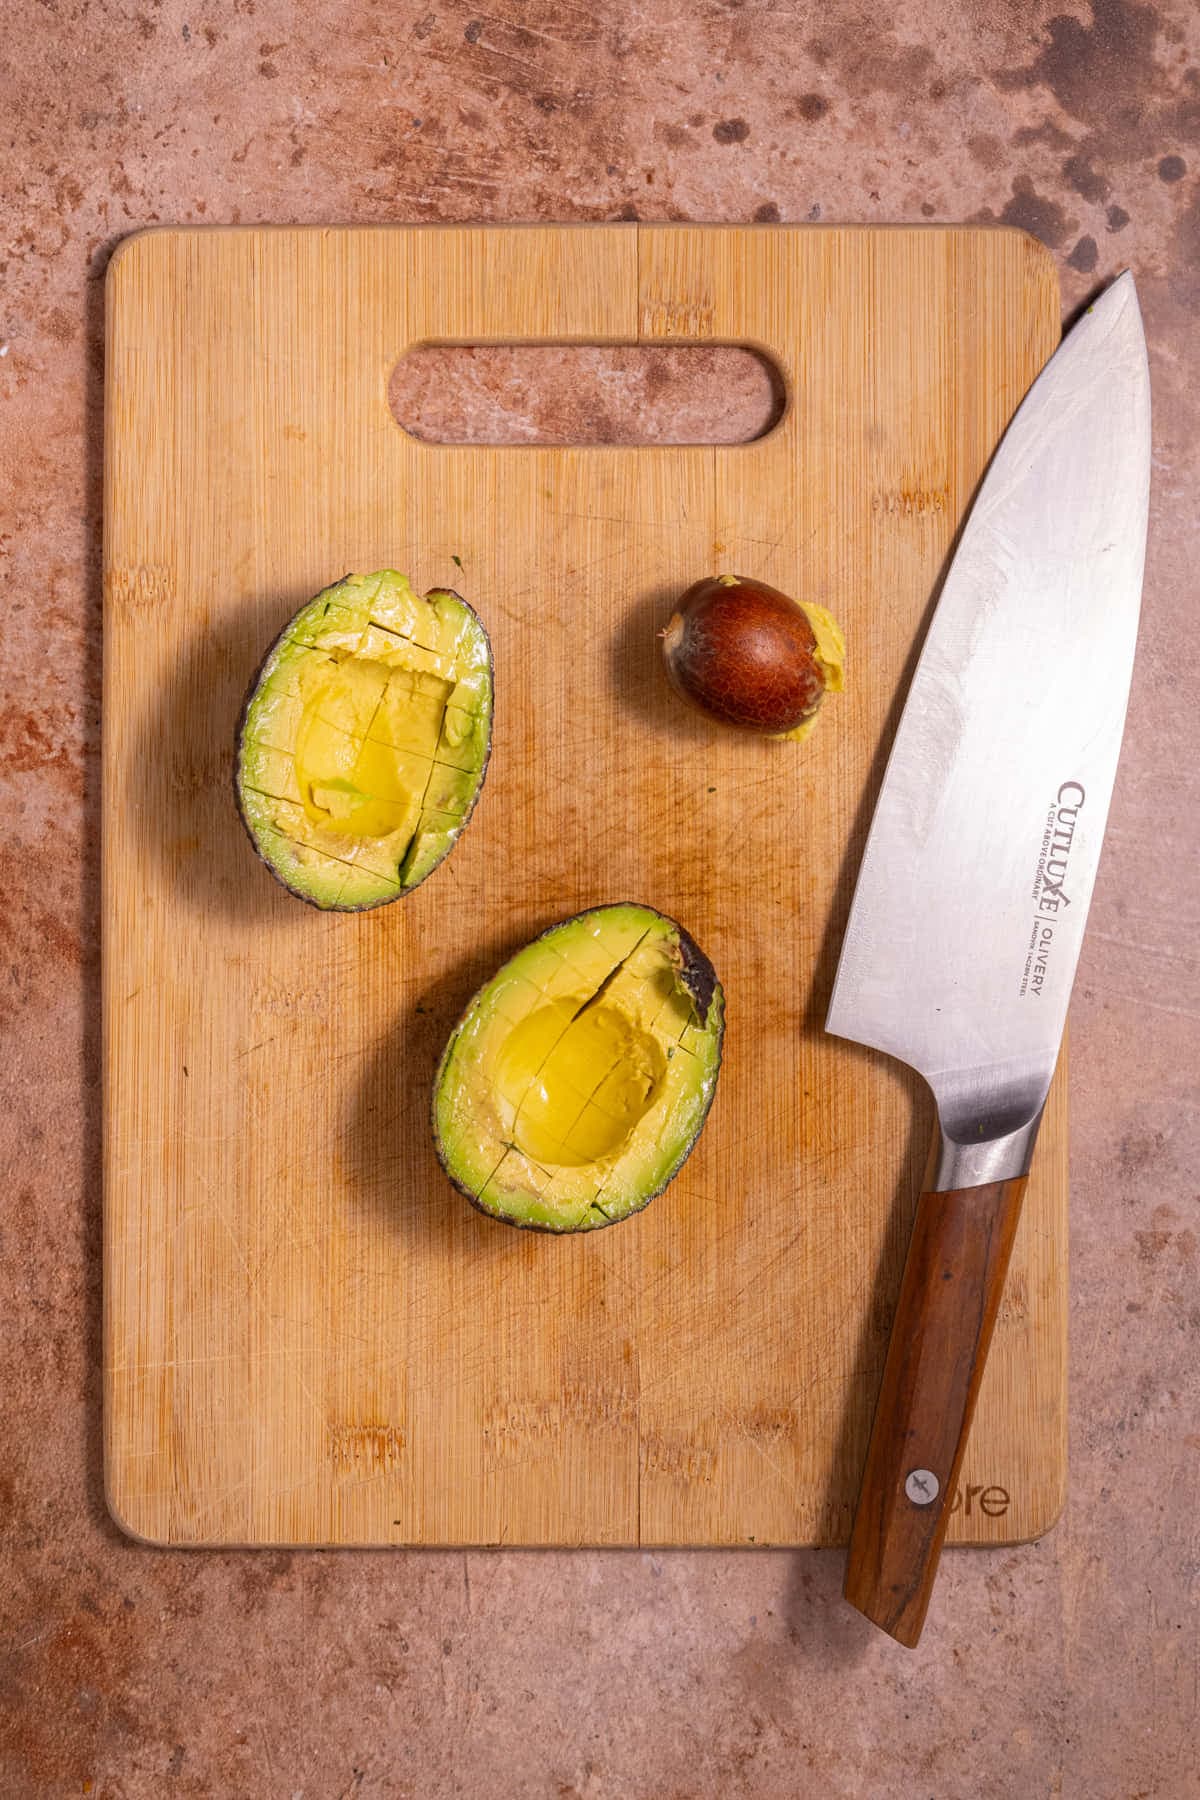 Avocado cut in half with pit removed